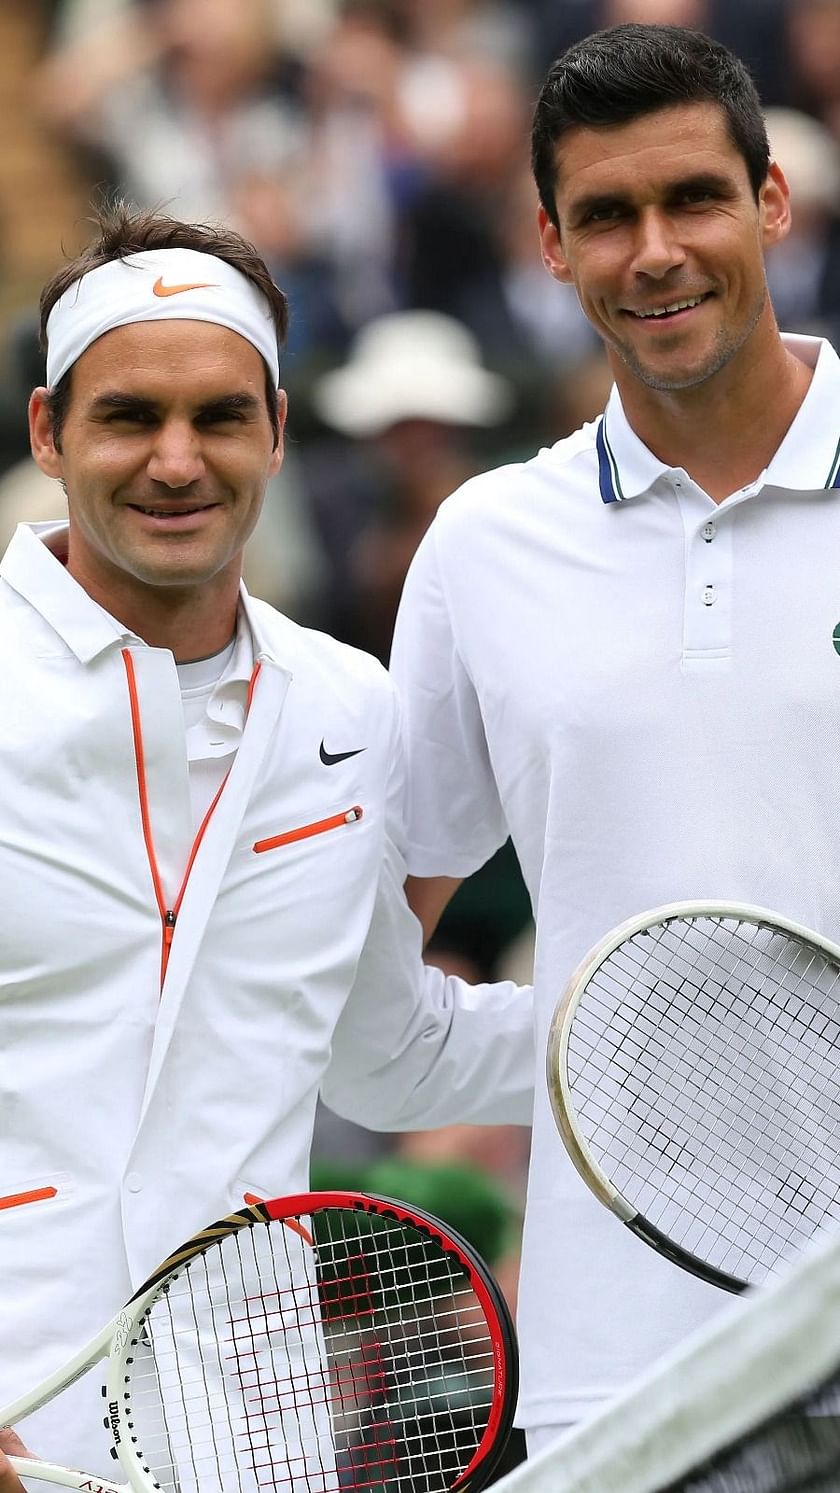 Gemoedsrust ozon Beschaven Roger Federer transforms from 'friendly' and 'kind' off the court to  'ferocious fighter' as soon as he steps on it: Victor Hanescu